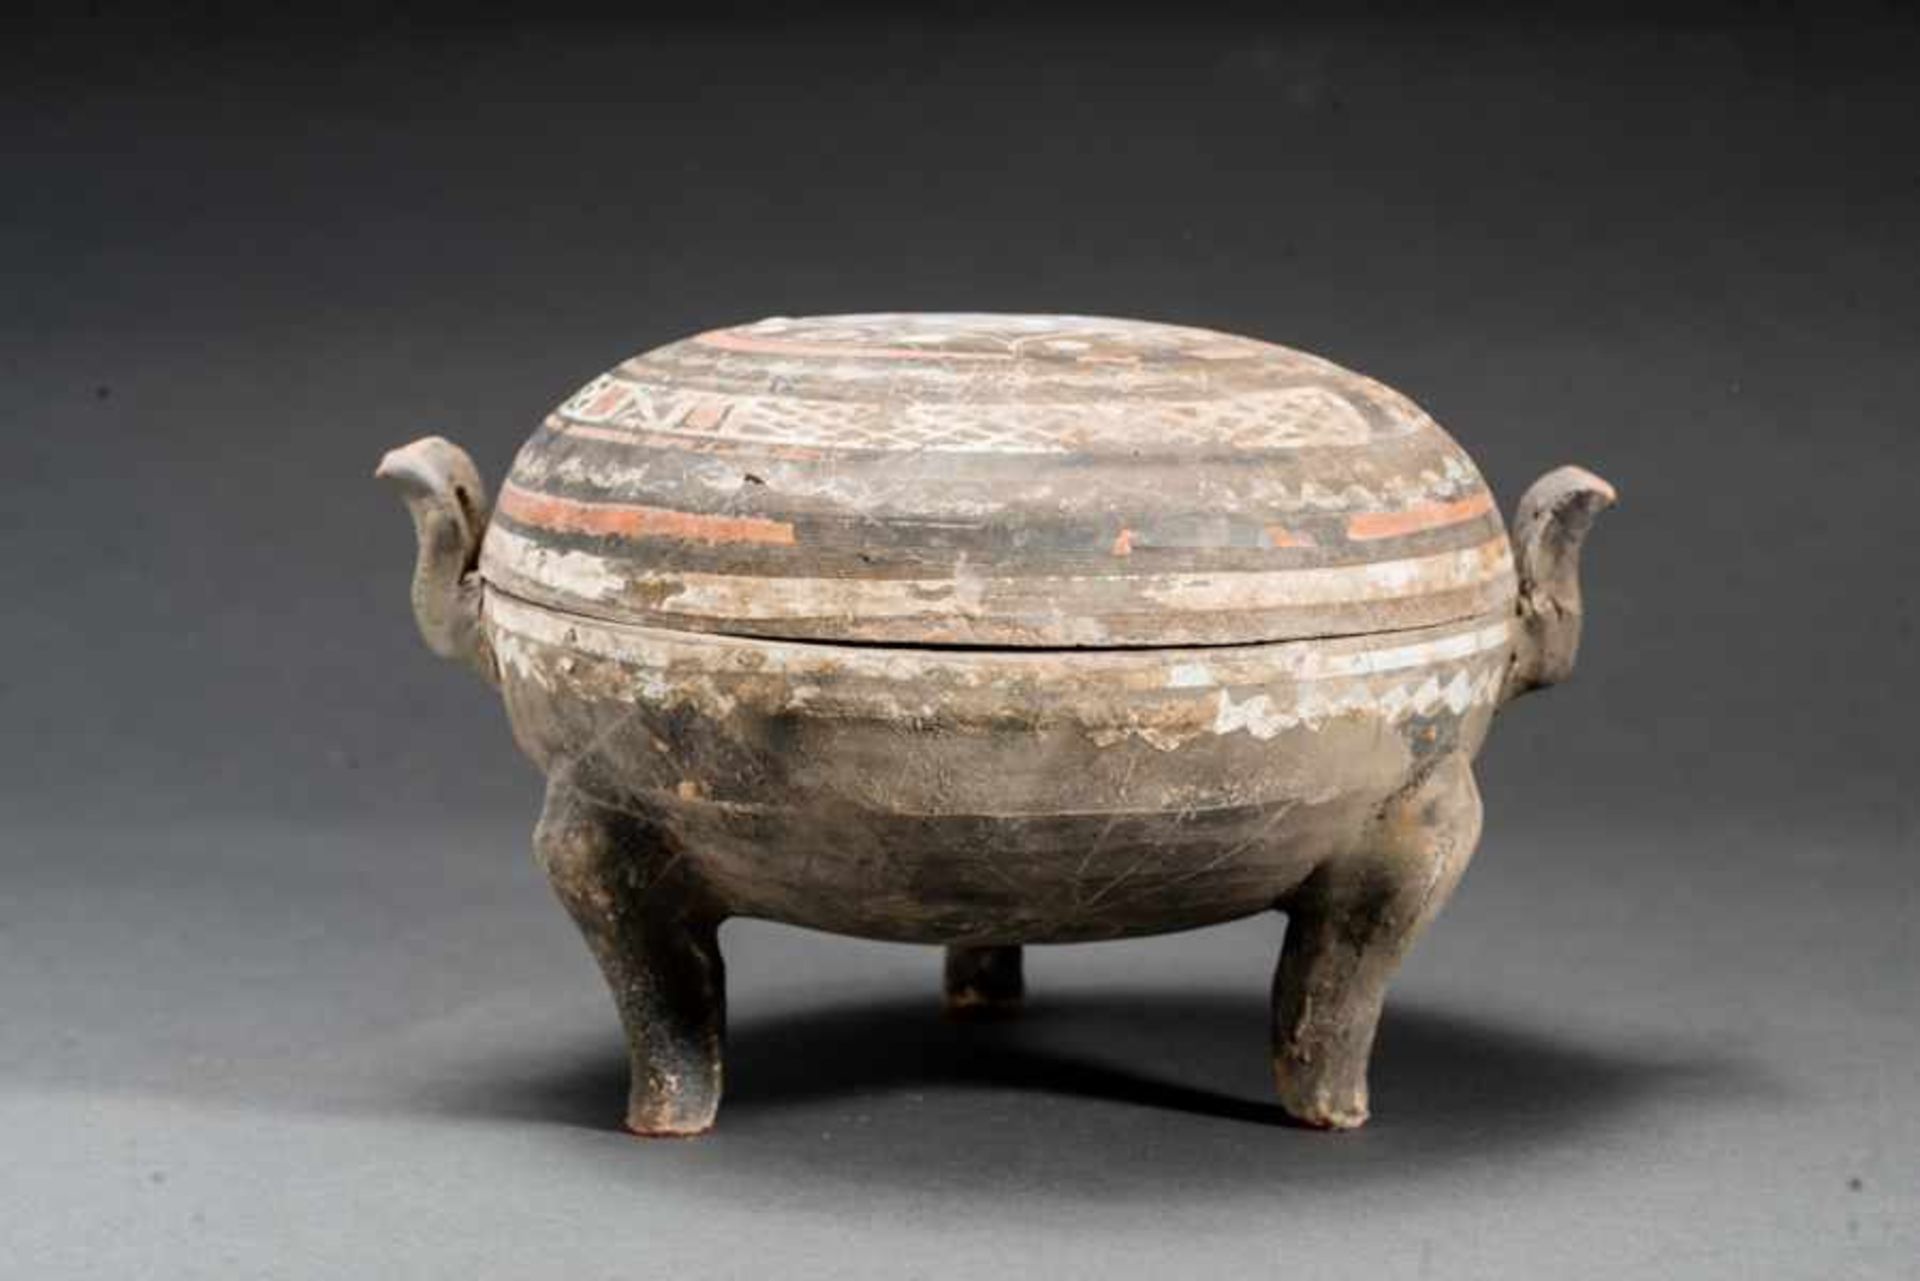 TRIPOD VESSEL WITH LID Terracotta with original painting. China, WesternHan dynasty (206 BCE - 9